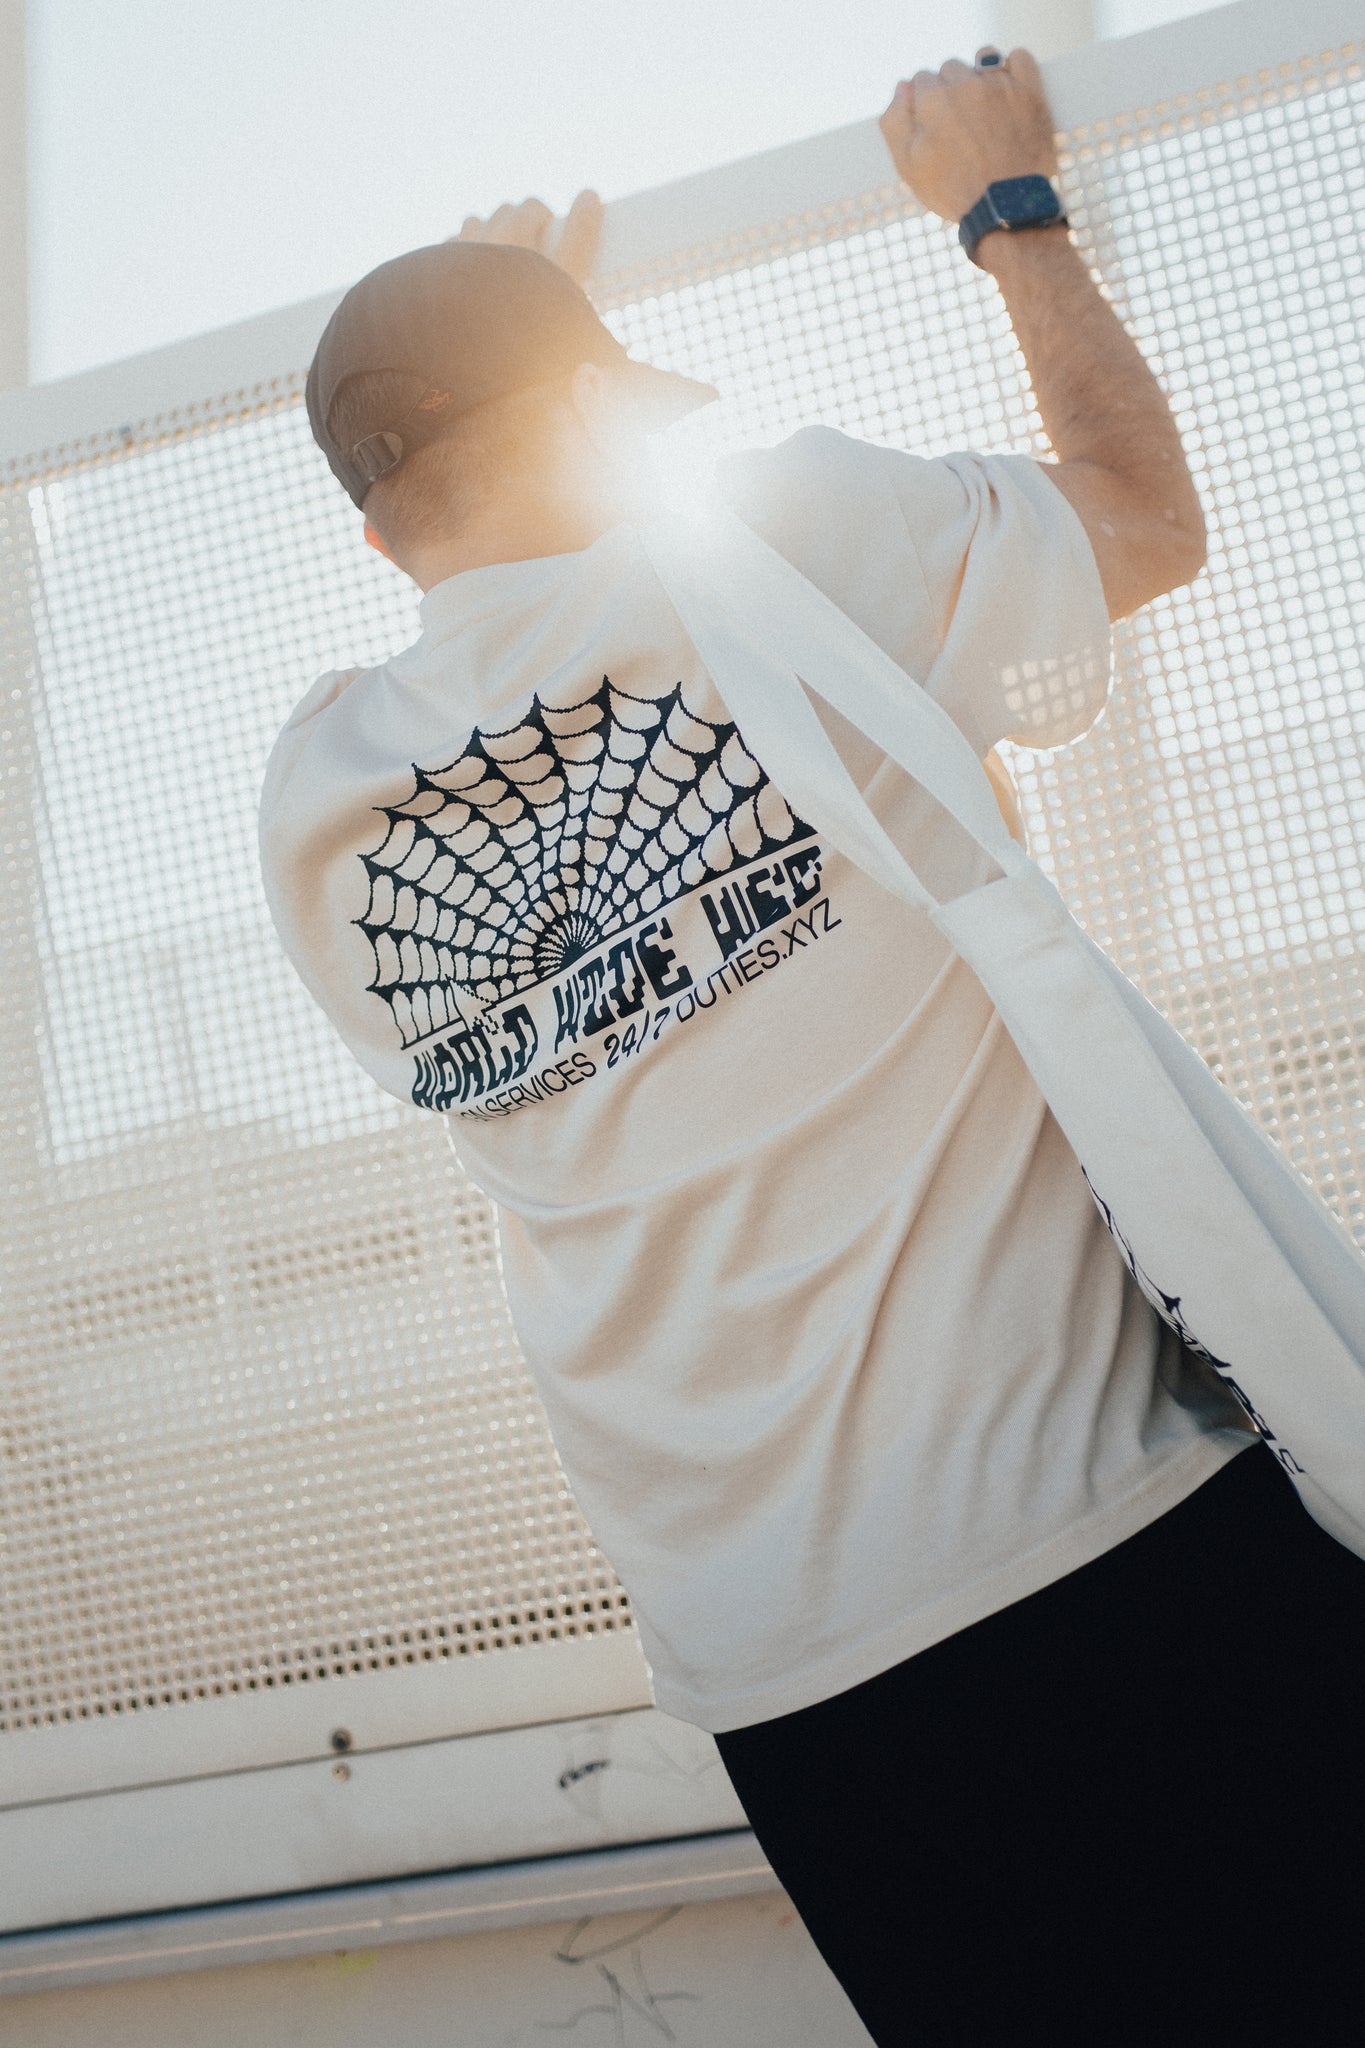 Man wearing an Ecru-colored World Wide Web T-shirt while climbing on a fence with his back against the camera showcasing the black printed graphics.